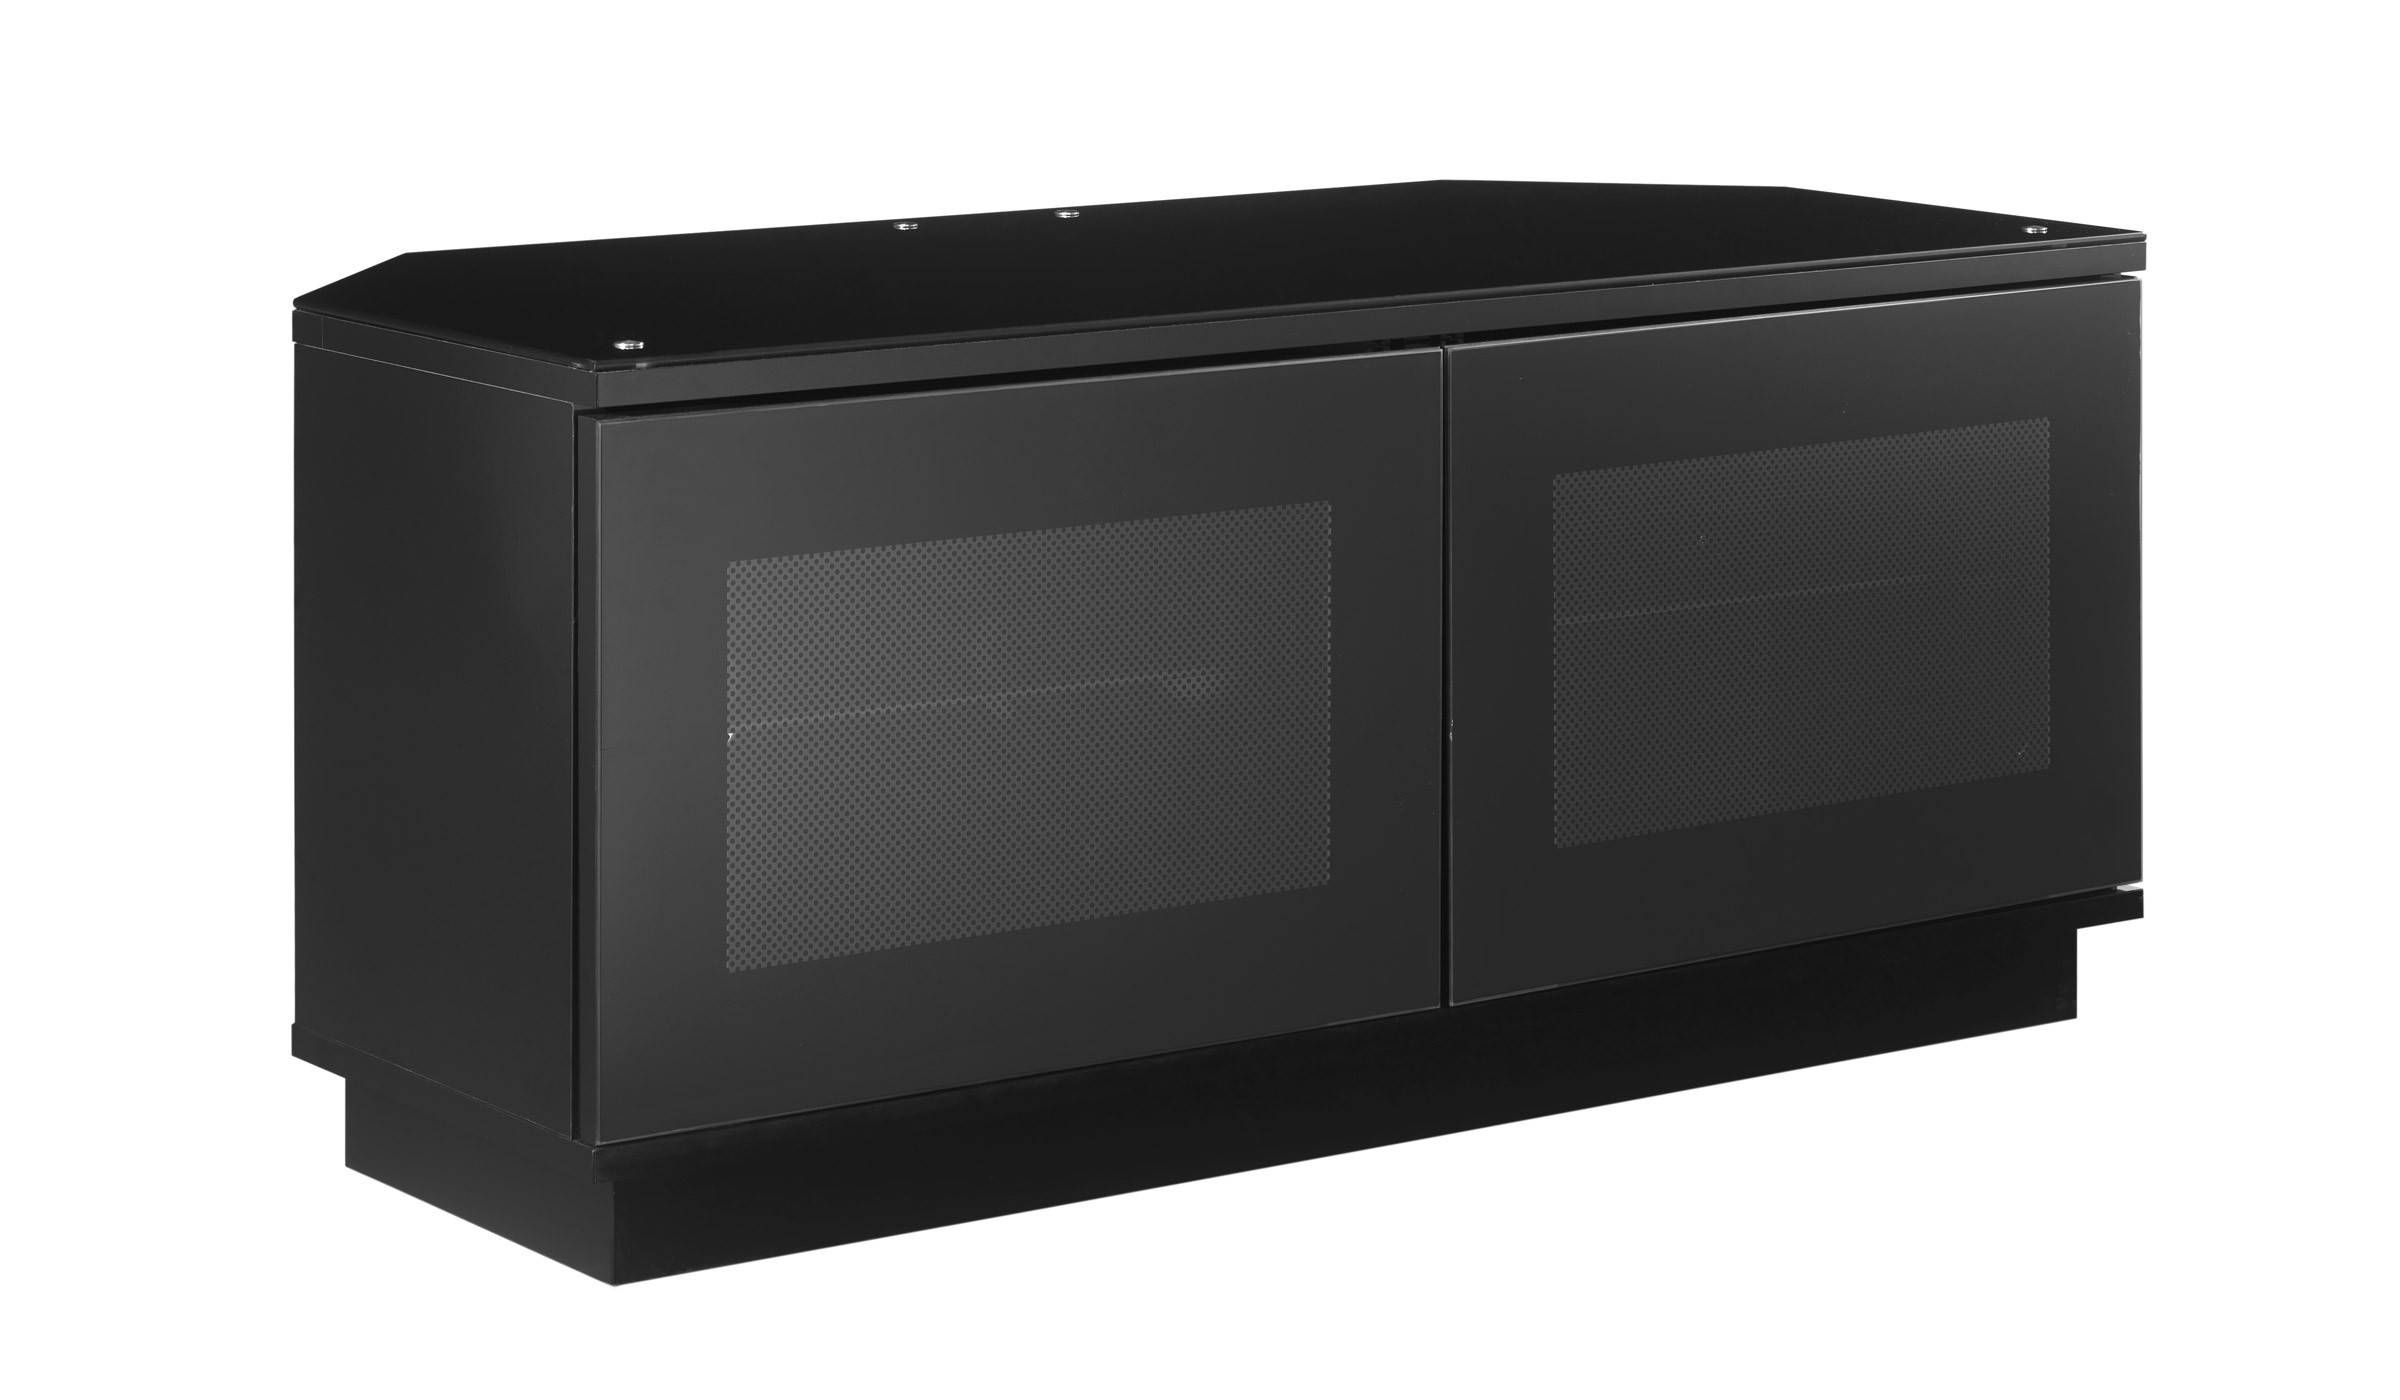 Small Black Tv Stand Cabinet With Door For Corner – Decofurnish Regarding Small Black Tv Cabinets (View 4 of 15)